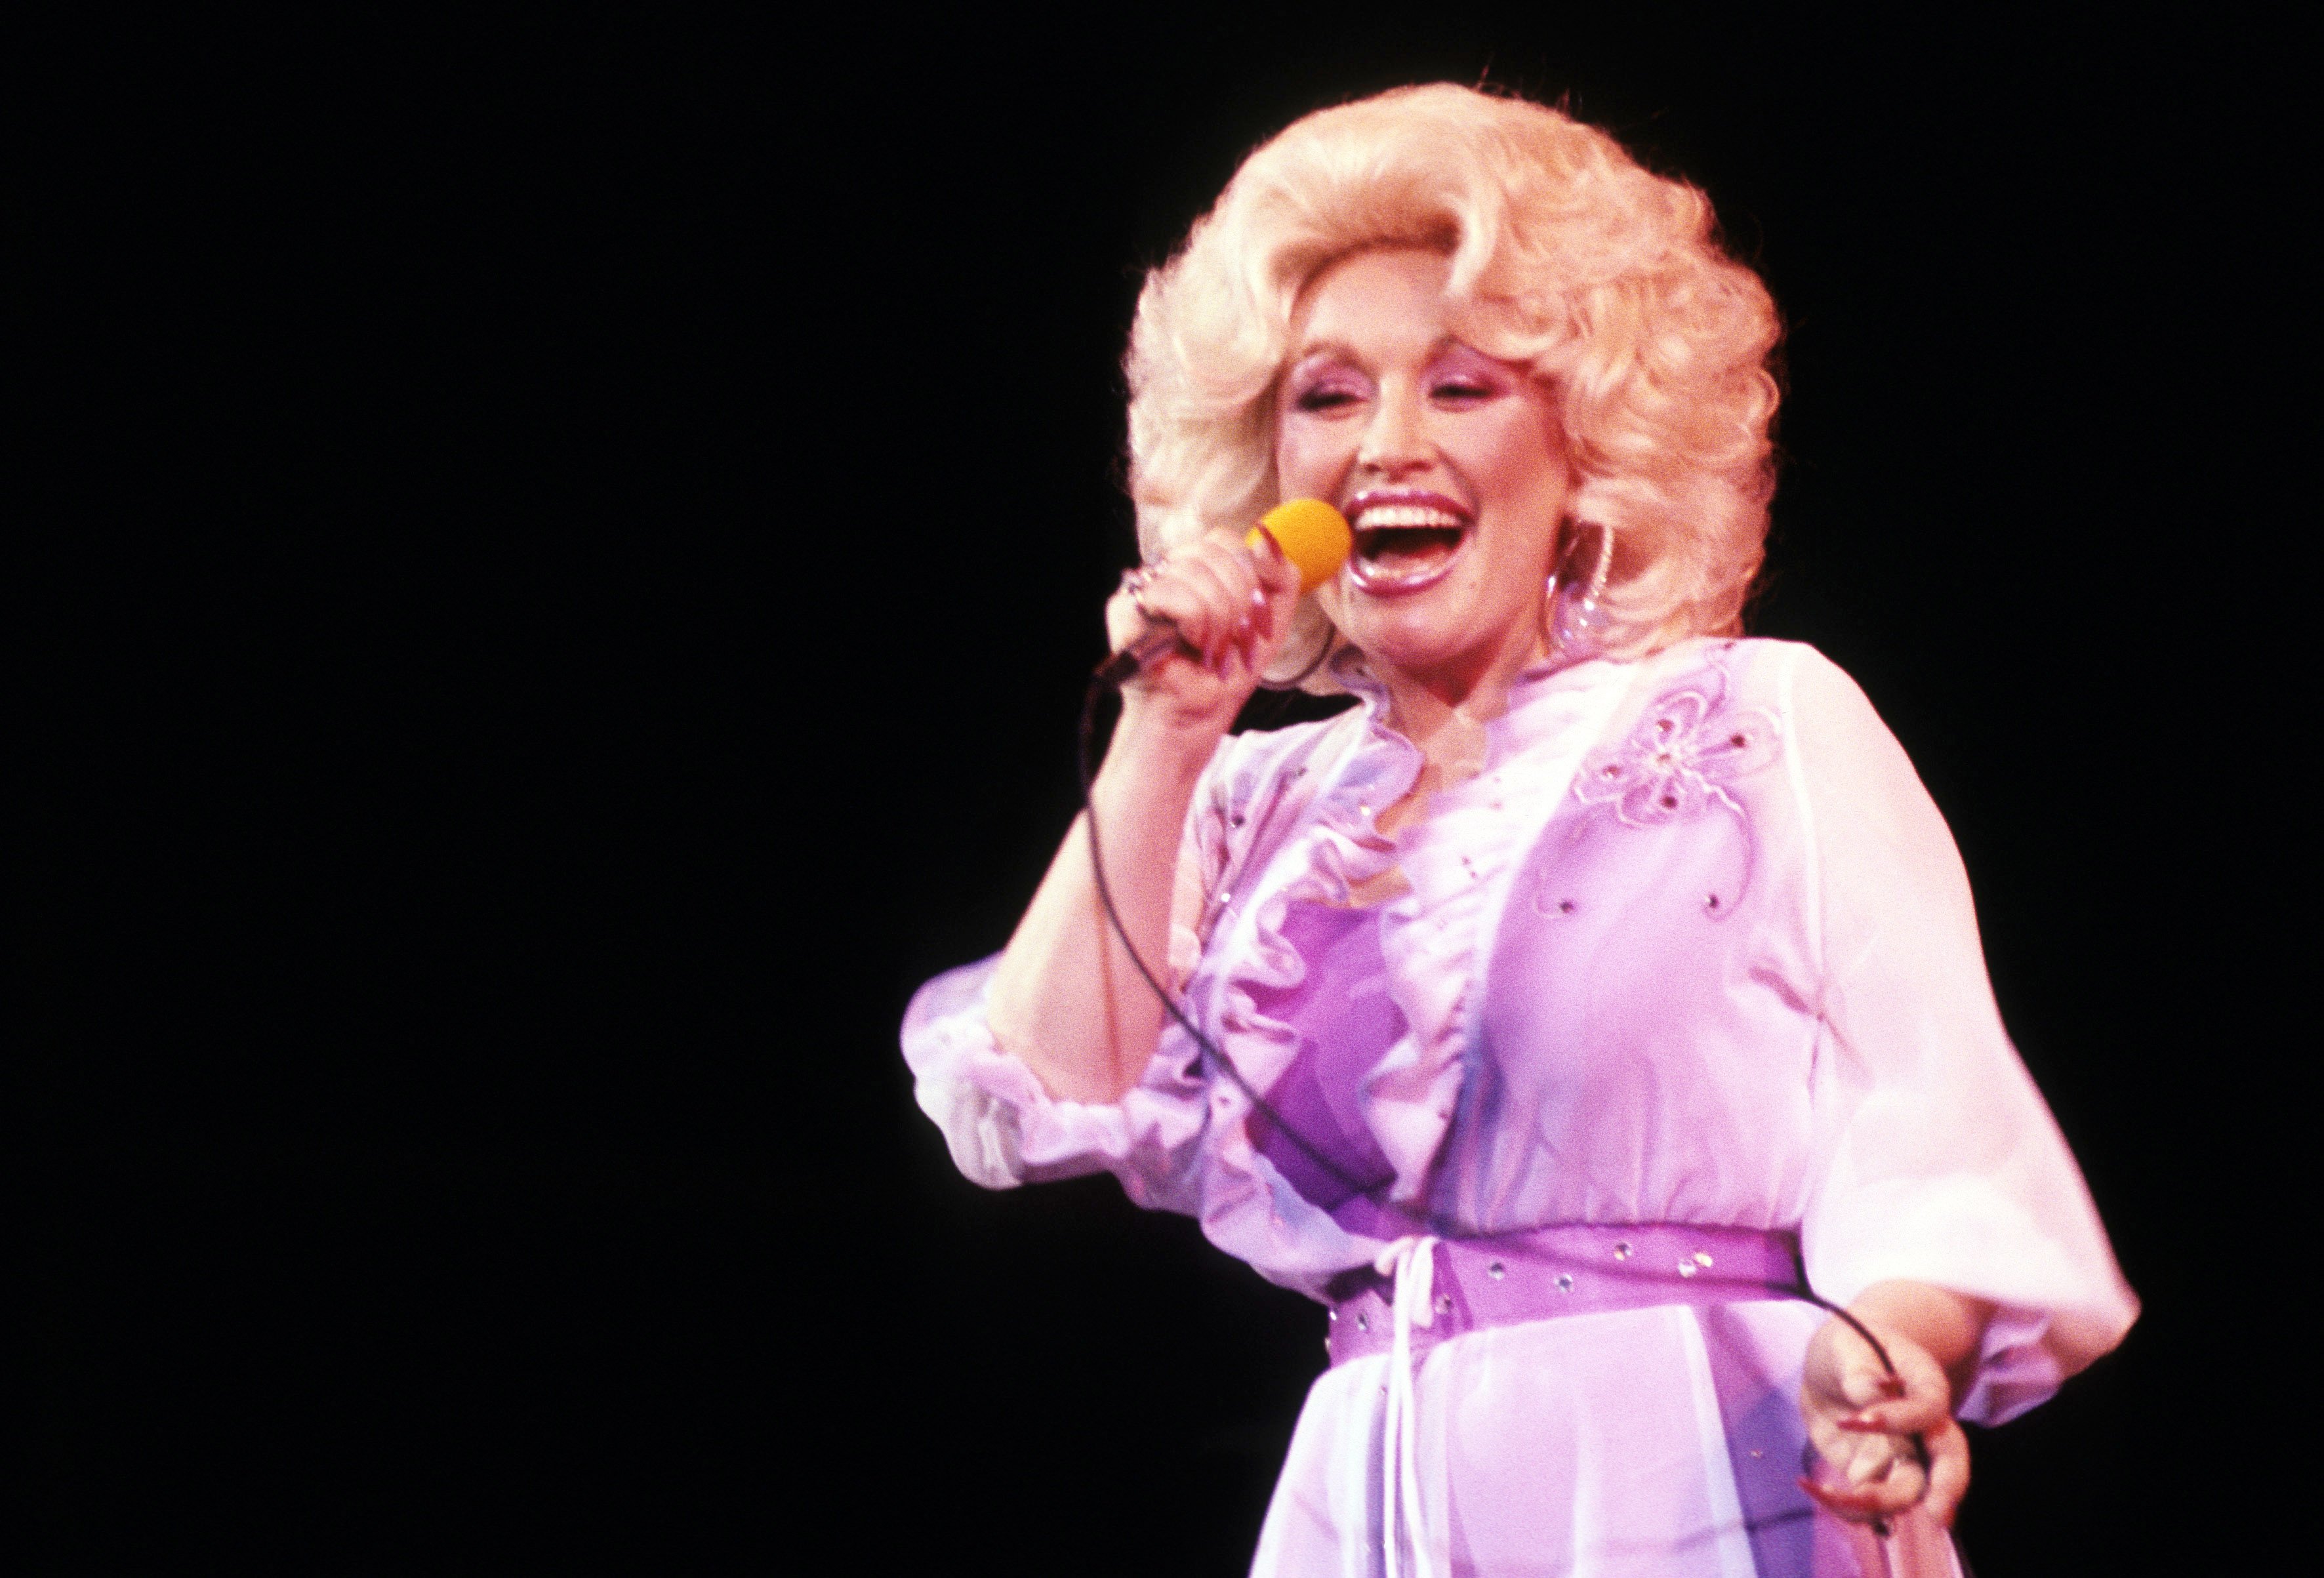 Dolly Parton wears a lavender dress and speaks into a microphone.